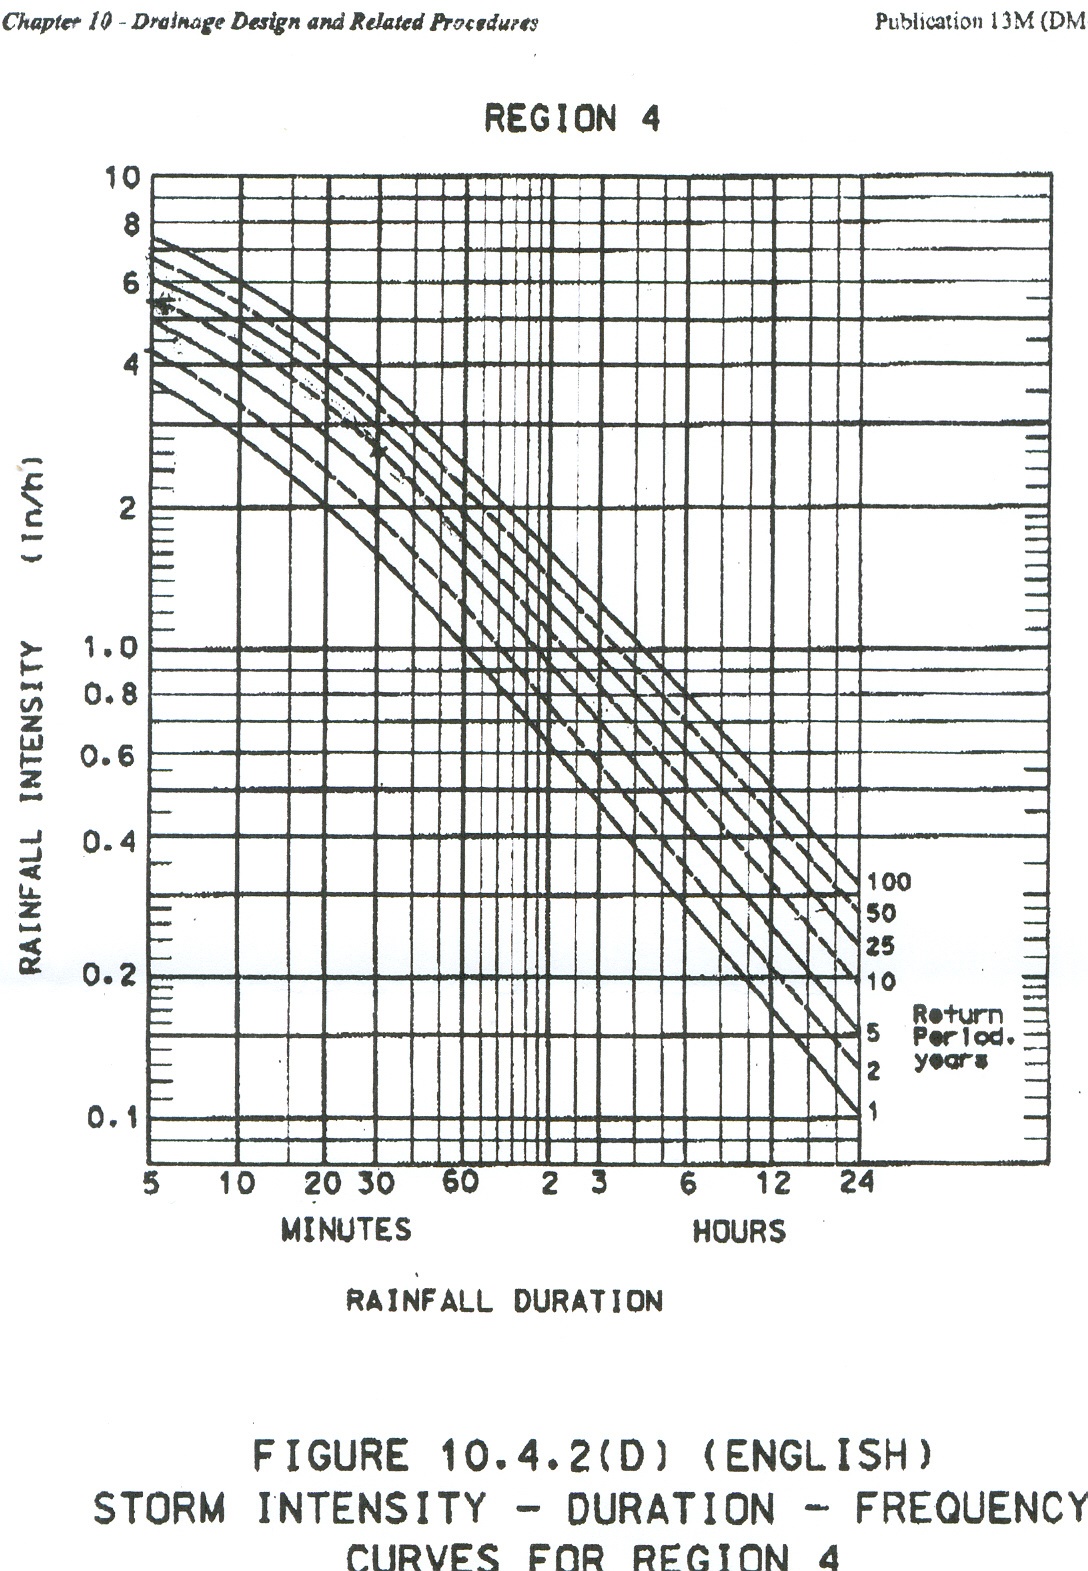 Intensity by Duration curve for rainfall